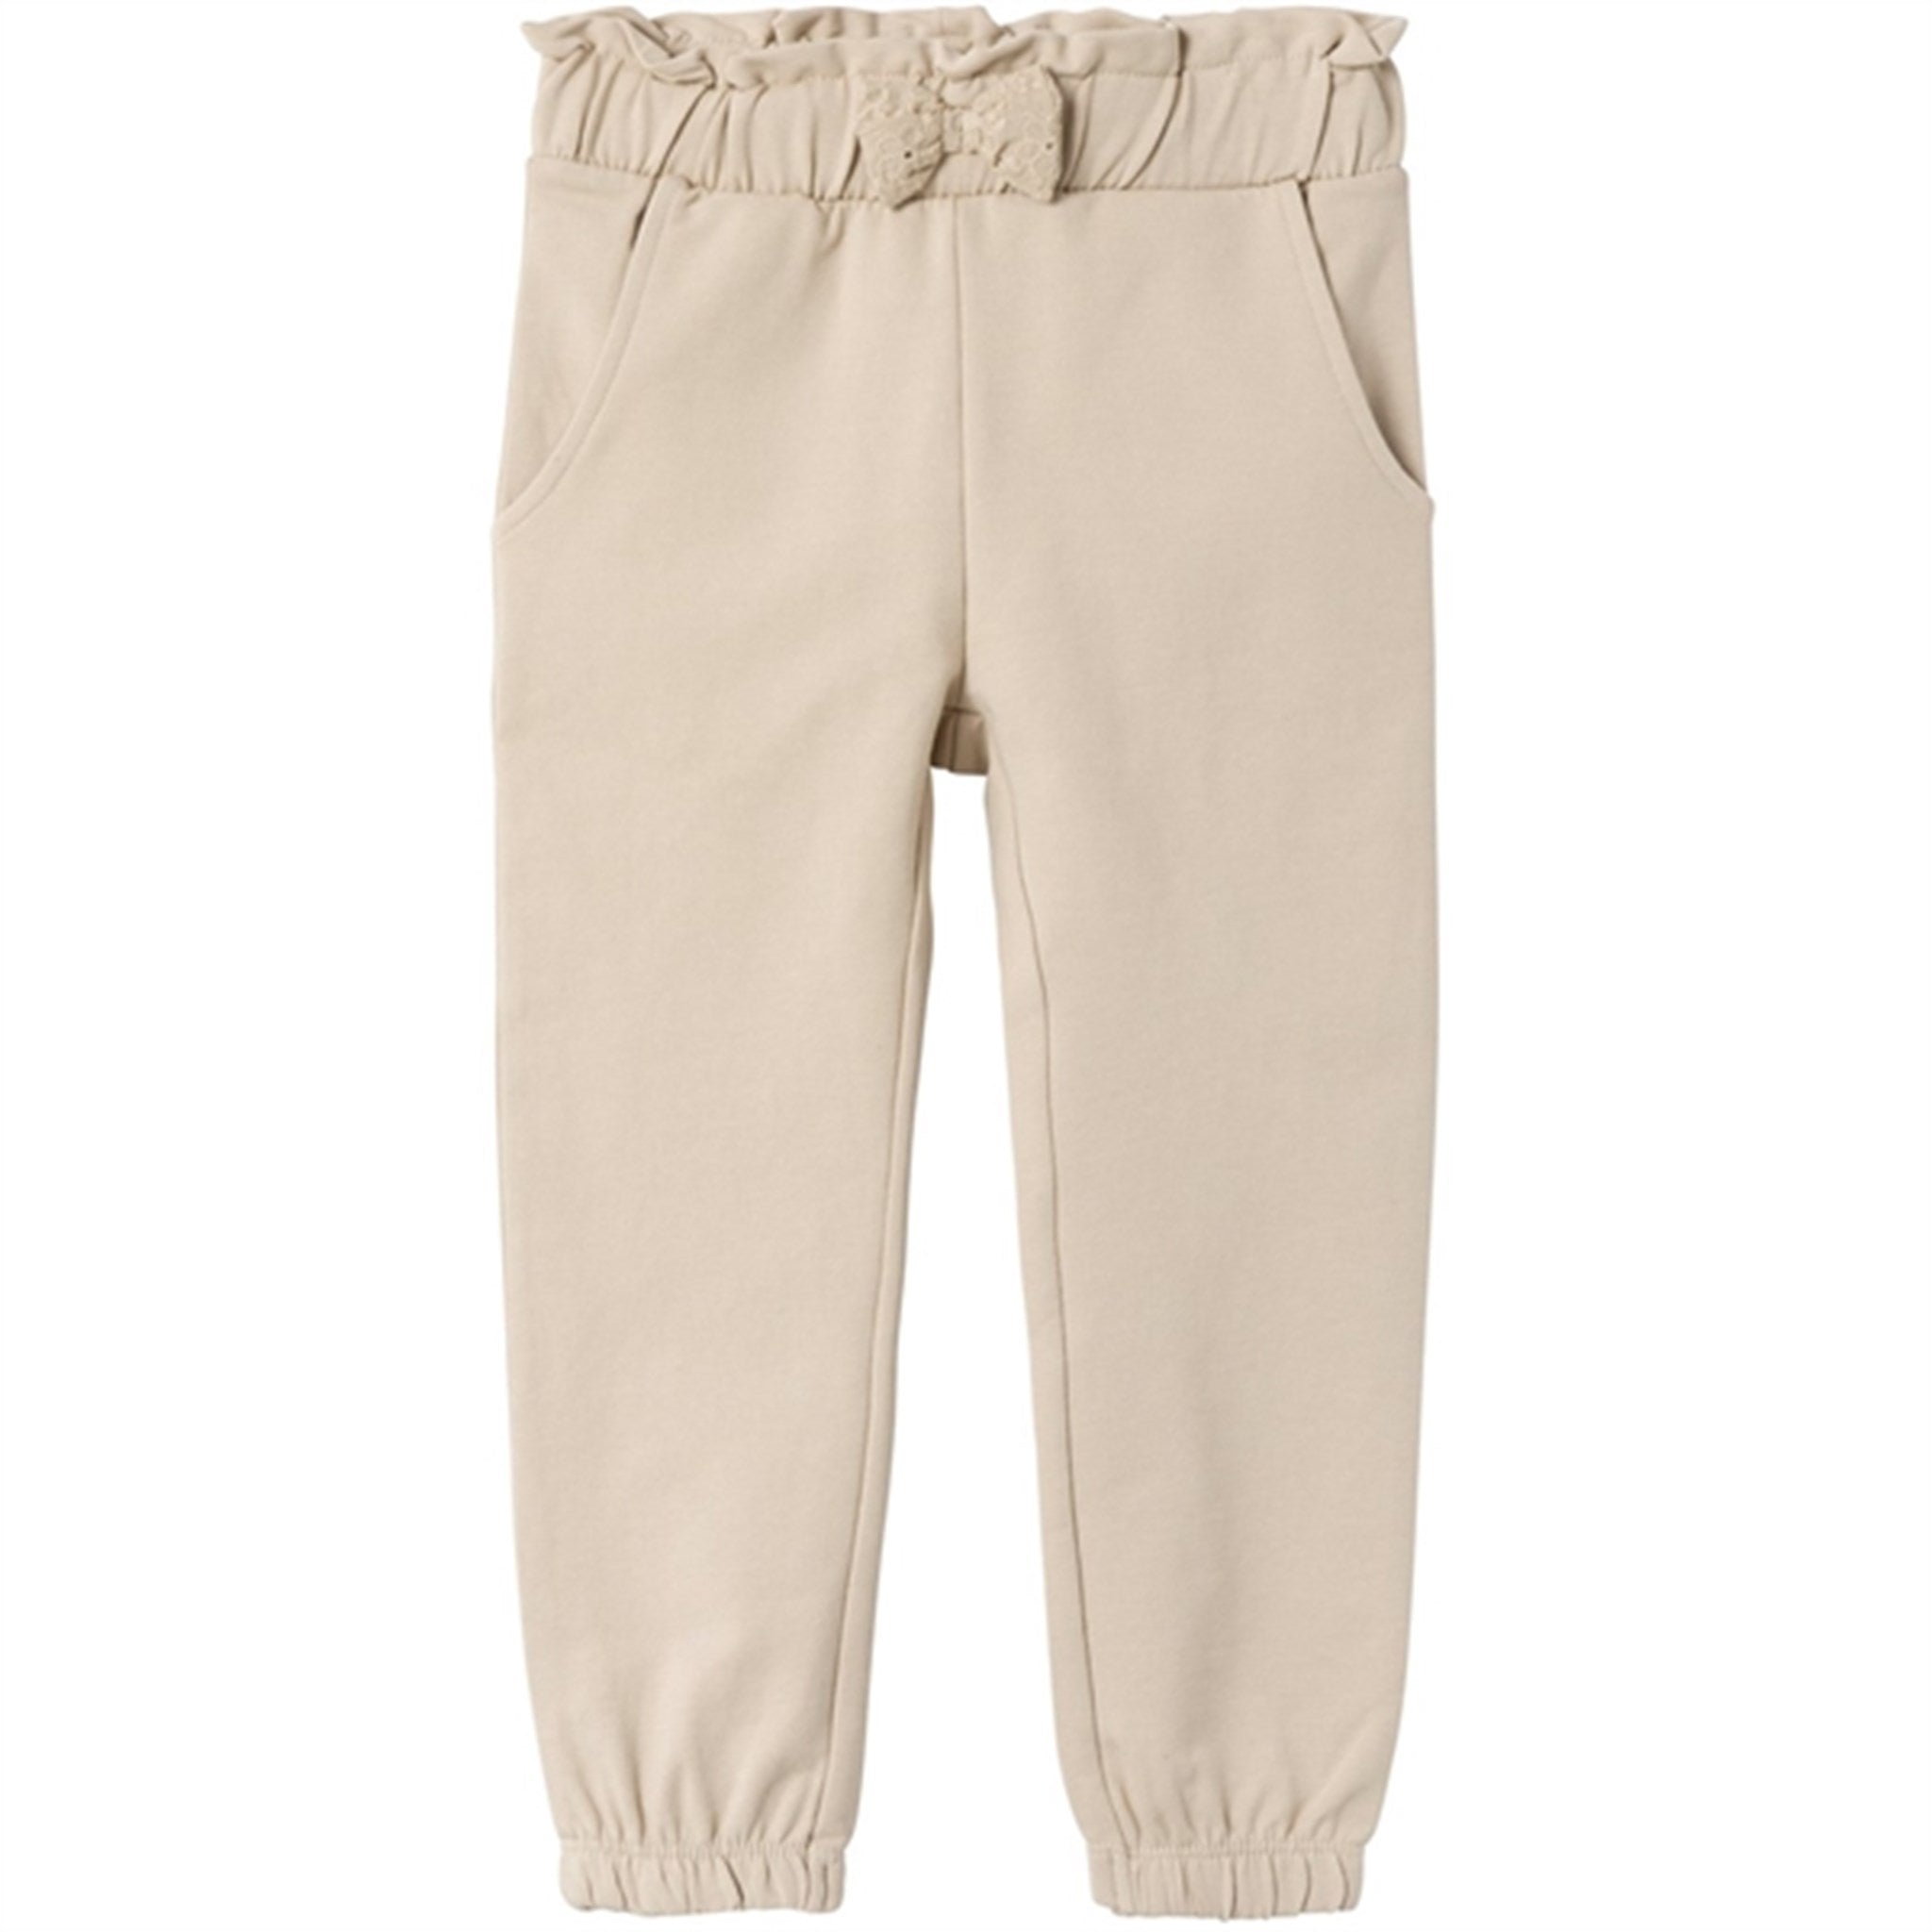 Name it Pure Cashmere Darly Sweatpants